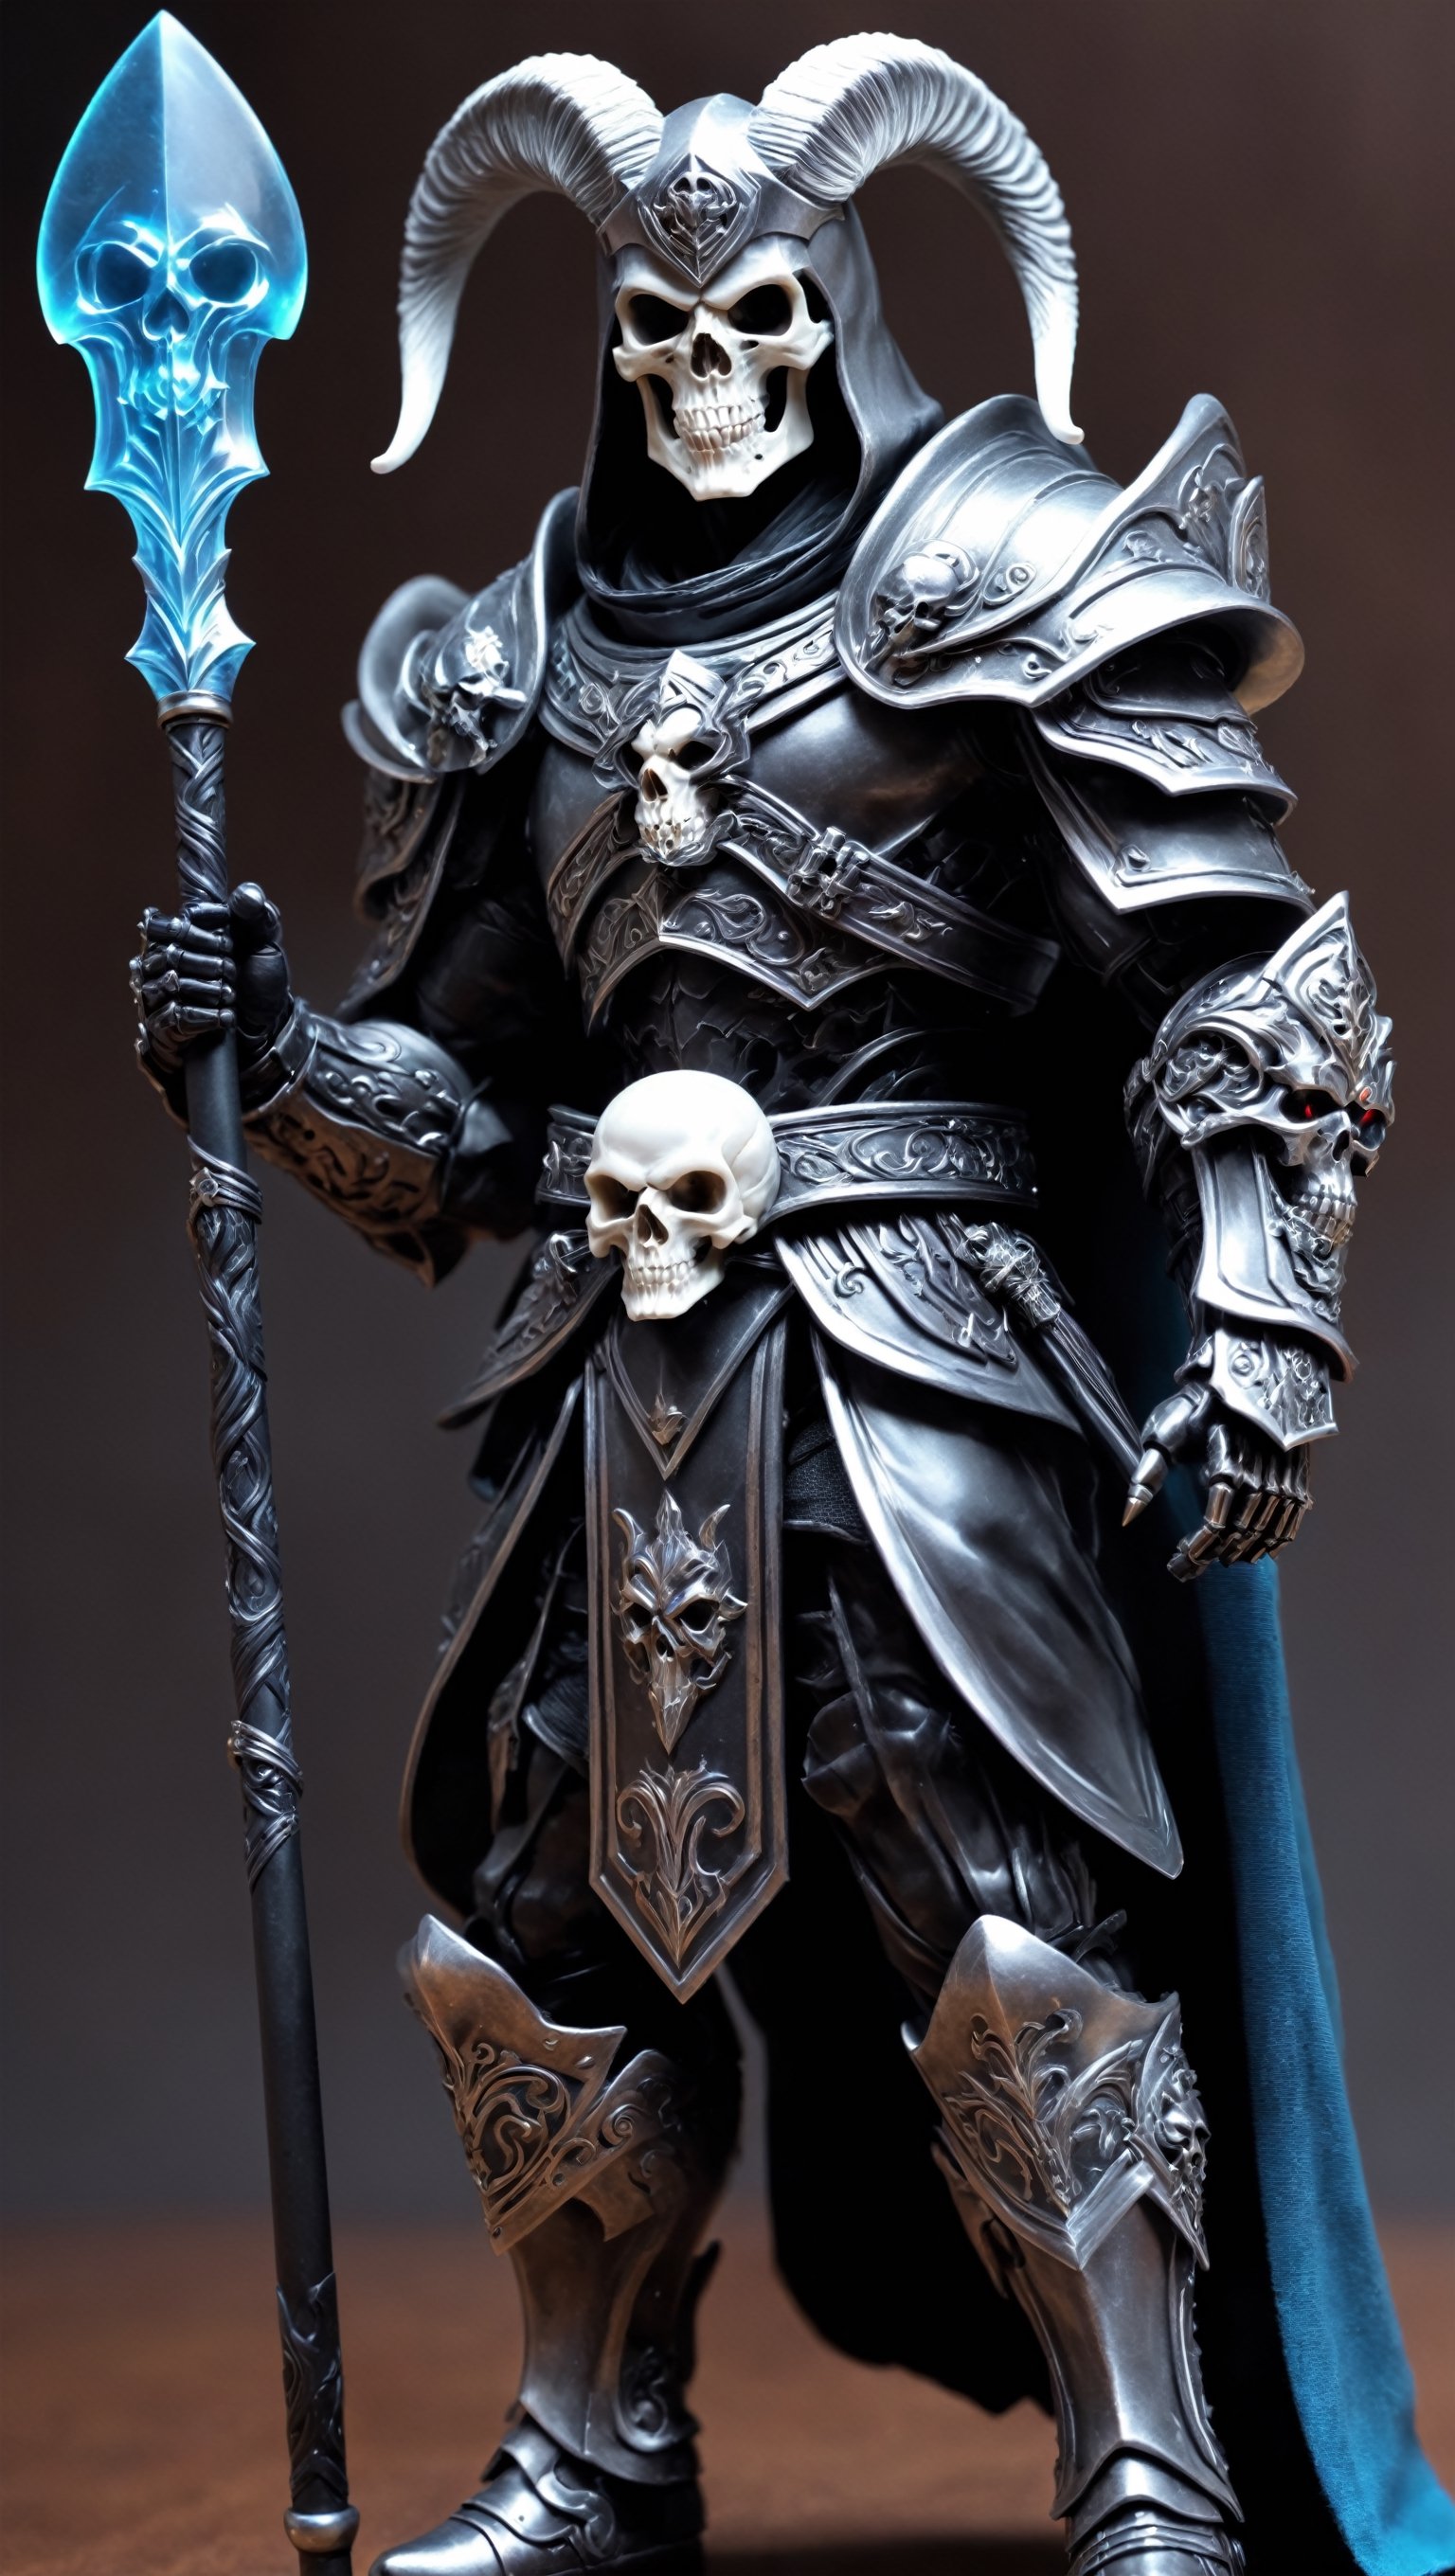 full Body,ultra Realistic,
master of universe,SKELTOR, Realistic SKULL Head, Extreme Detailed skull Armor,muscle Body,
ultra Realistic,Holding skul lGoat Head cane,
ultraQuality 3d figure,ActionFigureQuiron style